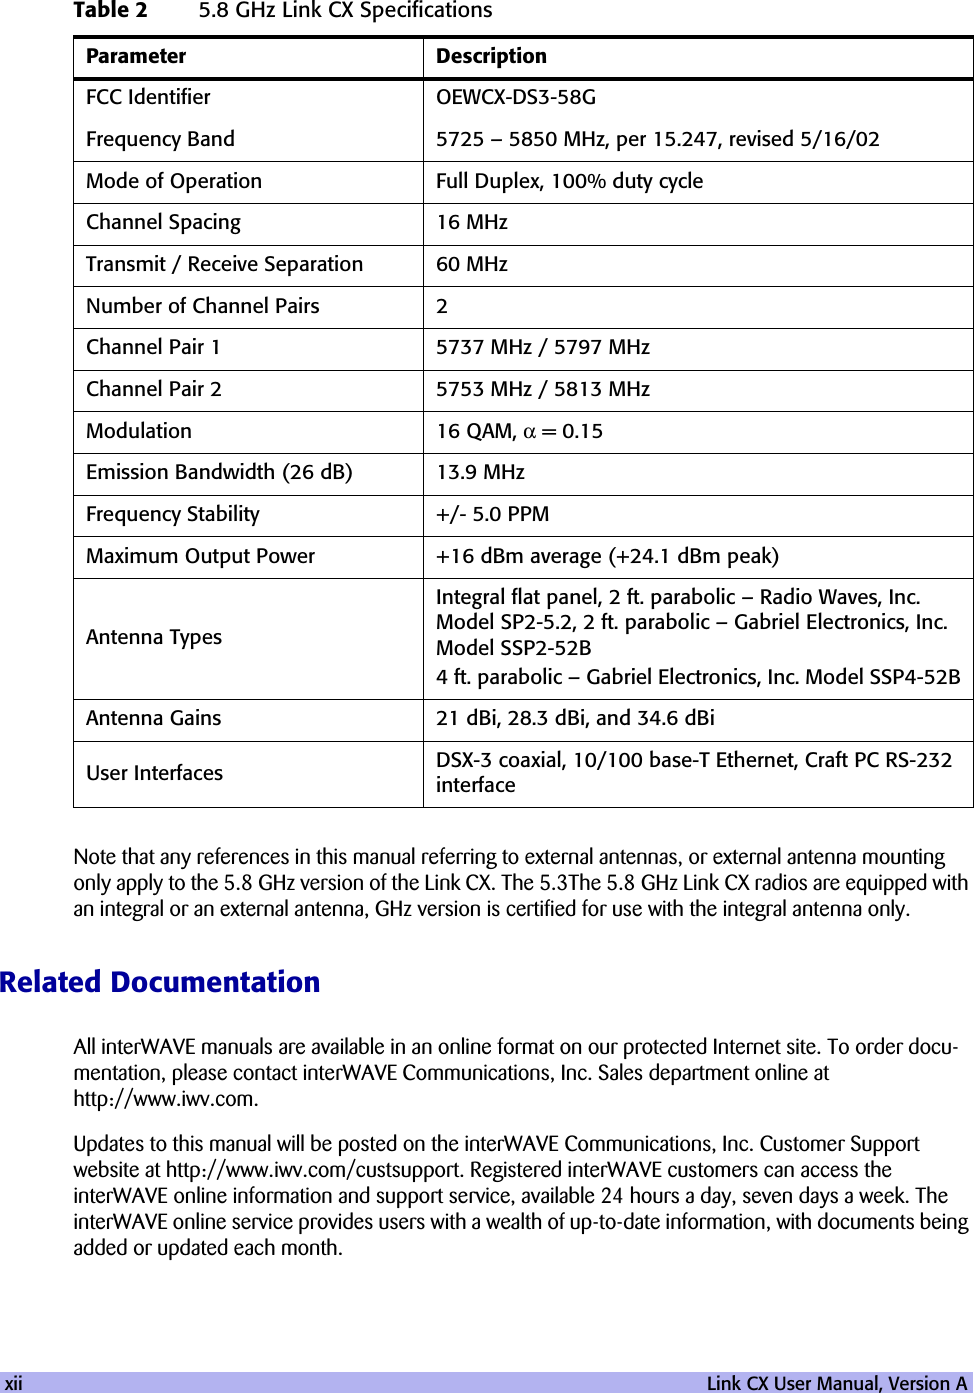 xii   Link CX User Manual, Version ANote that any references in this manual referring to external antennas, or external antenna mounting only apply to the 5.8 GHz version of the Link CX. The 5.3The 5.8 GHz Link CX radios are equipped with an integral or an external antenna, GHz version is certified for use with the integral antenna only.Related DocumentationAll interWAVE manuals are available in an online format on our protected Internet site. To order docu-mentation, please contact interWAVE Communications, Inc. Sales department online at http://www.iwv.com.Updates to this manual will be posted on the interWAVE Communications, Inc. Customer Support website at http://www.iwv.com/custsupport. Registered interWAVE customers can access the interWAVE online information and support service, available 24 hours a day, seven days a week. The interWAVE online service provides users with a wealth of up-to-date information, with documents being added or updated each month.Table 2 5.8 GHz Link CX SpecificationsParameter DescriptionFCC Identifier OEWCX-DS3-58GFrequency Band 5725 – 5850 MHz, per 15.247, revised 5/16/02Mode of Operation Full Duplex, 100% duty cycleChannel Spacing 16 MHzTransmit / Receive Separation 60 MHzNumber of Channel Pairs 2Channel Pair 1 5737 MHz / 5797 MHzChannel Pair 2 5753 MHz / 5813 MHzModulation 16 QAM, α= 0.15Emission Bandwidth (26 dB) 13.9 MHzFrequency Stability +/- 5.0 PPMMaximum Output Power +16 dBm average (+24.1 dBm peak)Antenna TypesIntegral flat panel, 2 ft. parabolic – Radio Waves, Inc. Model SP2-5.2, 2 ft. parabolic – Gabriel Electronics, Inc. Model SSP2-52B4 ft. parabolic – Gabriel Electronics, Inc. Model SSP4-52BAntenna Gains 21 dBi, 28.3 dBi, and 34.6 dBiUser Interfaces DSX-3 coaxial, 10/100 base-T Ethernet, Craft PC RS-232 interface